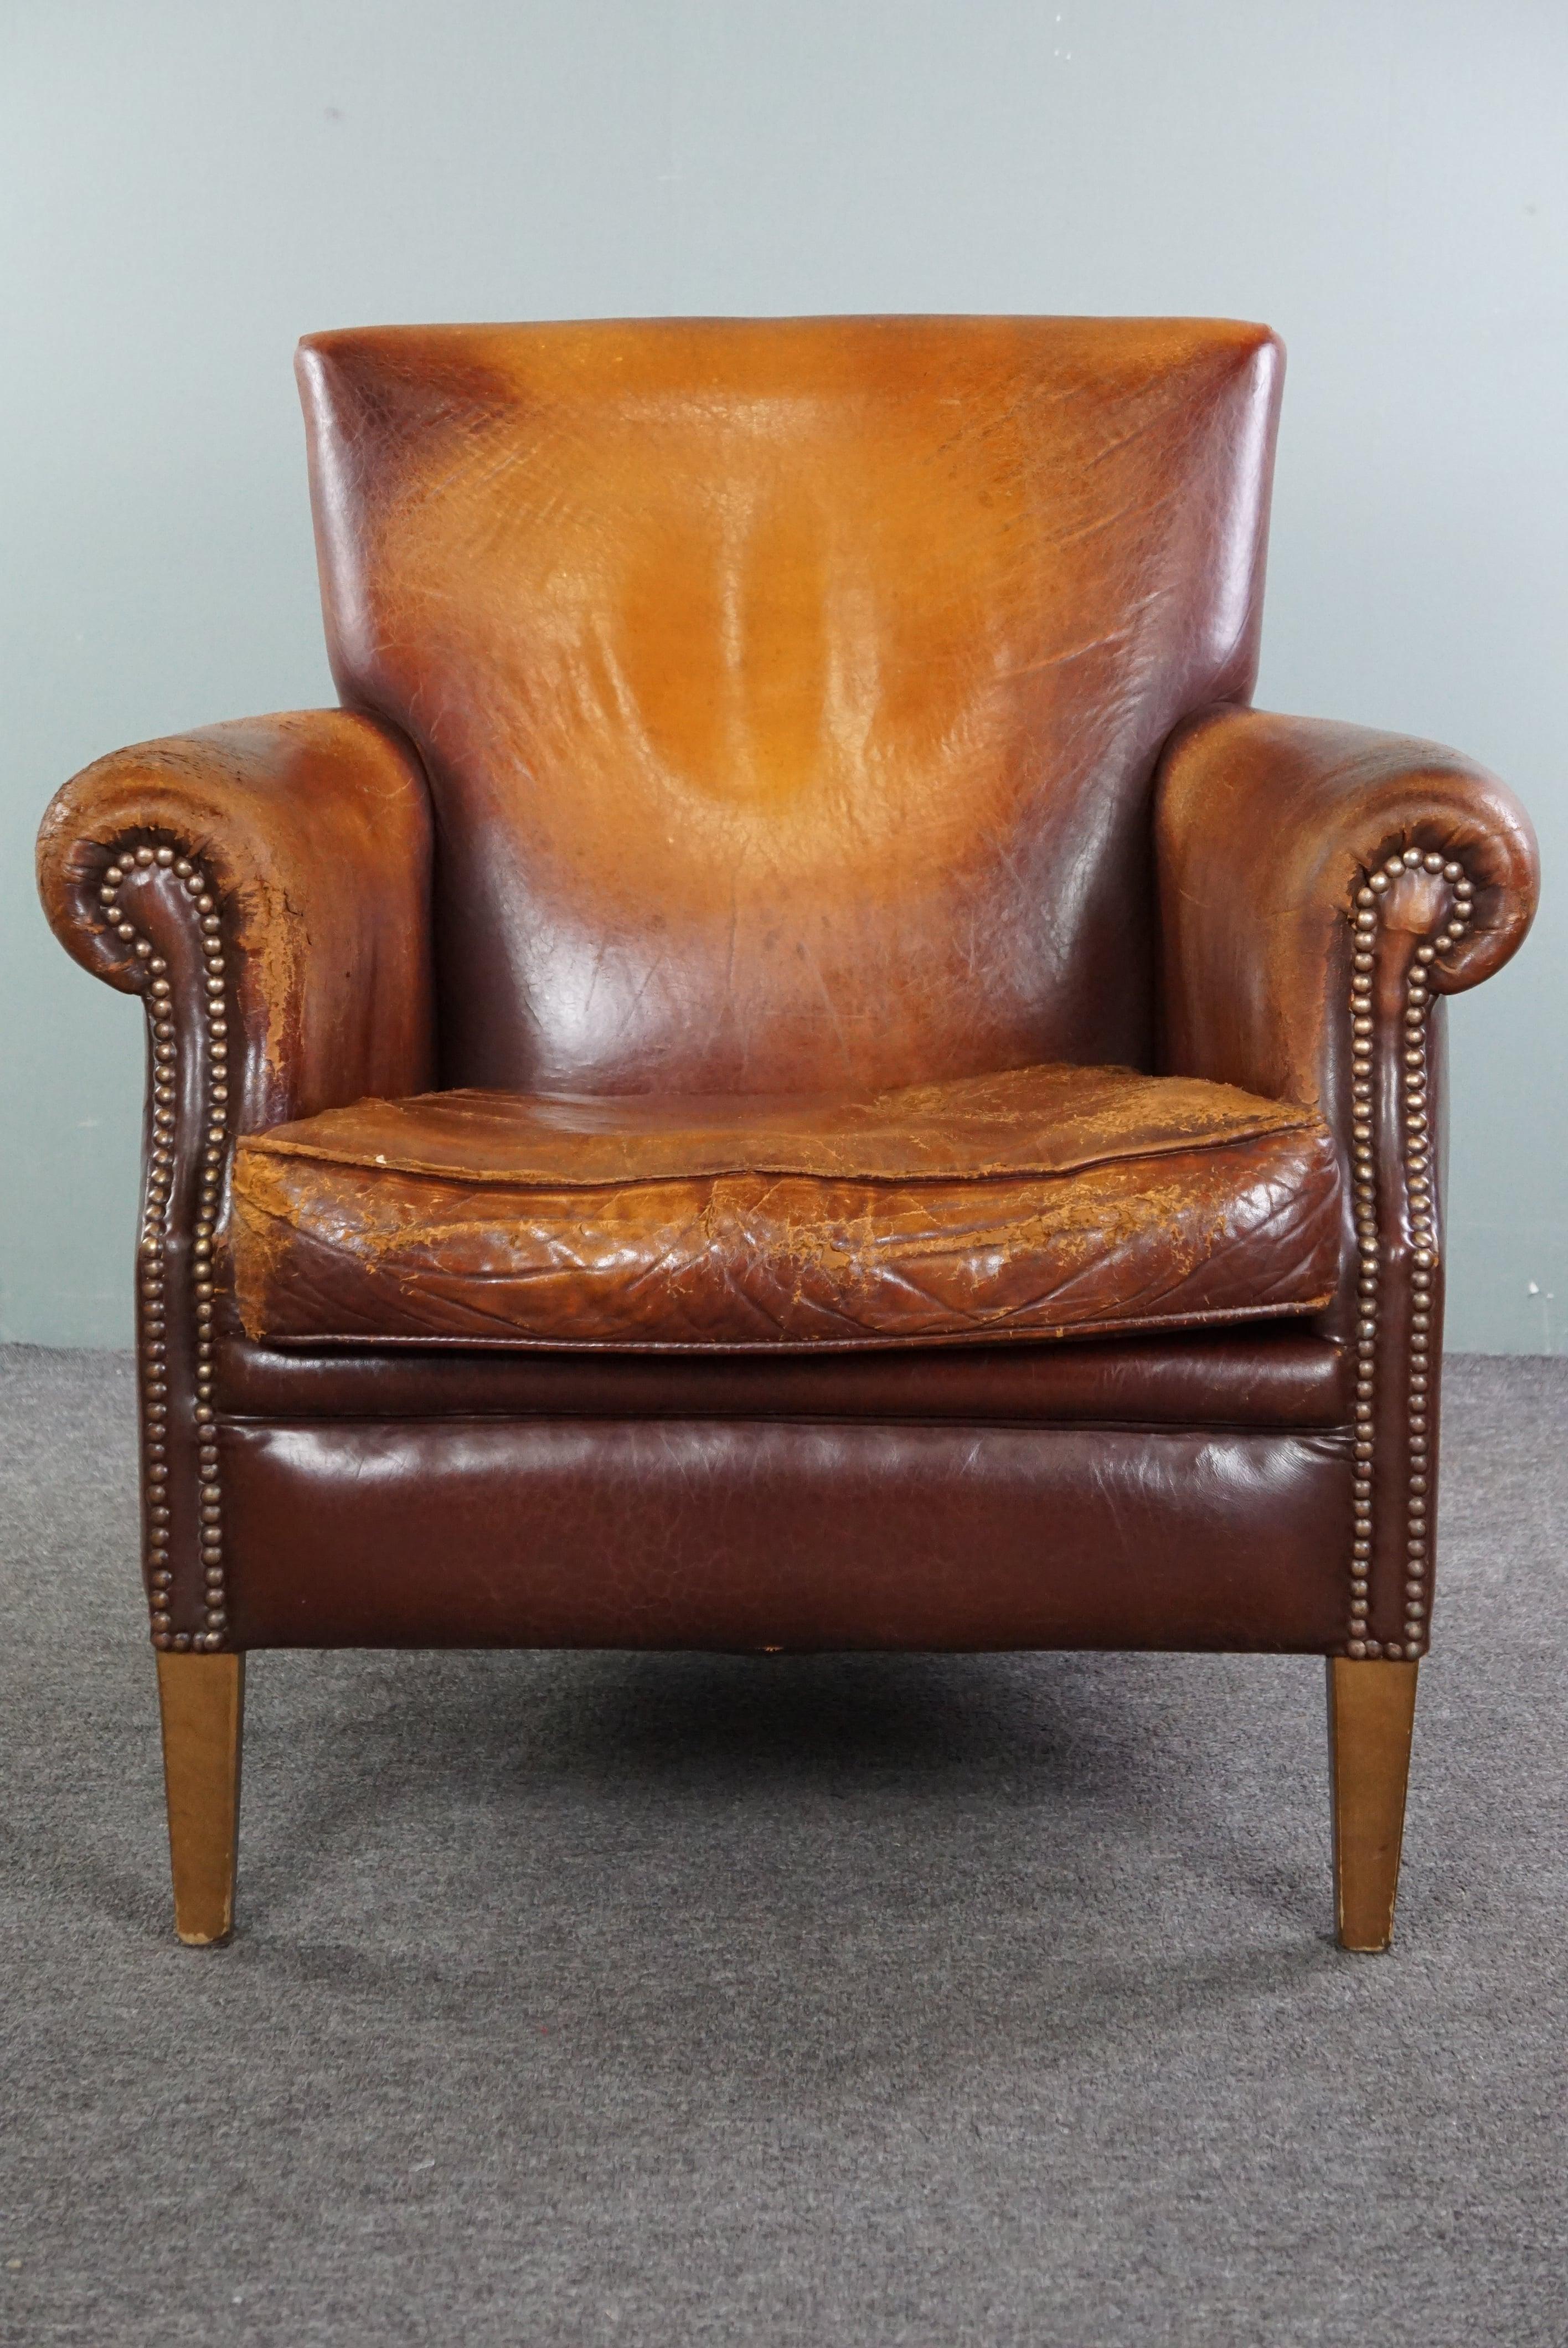 Offered is this armchair made of sheep leather, featuring plenty of patina and character. Isn't this just awesome, don't you think? A positively weathered sheep leather armchair with a delightful worn look is precisely what would add so much more